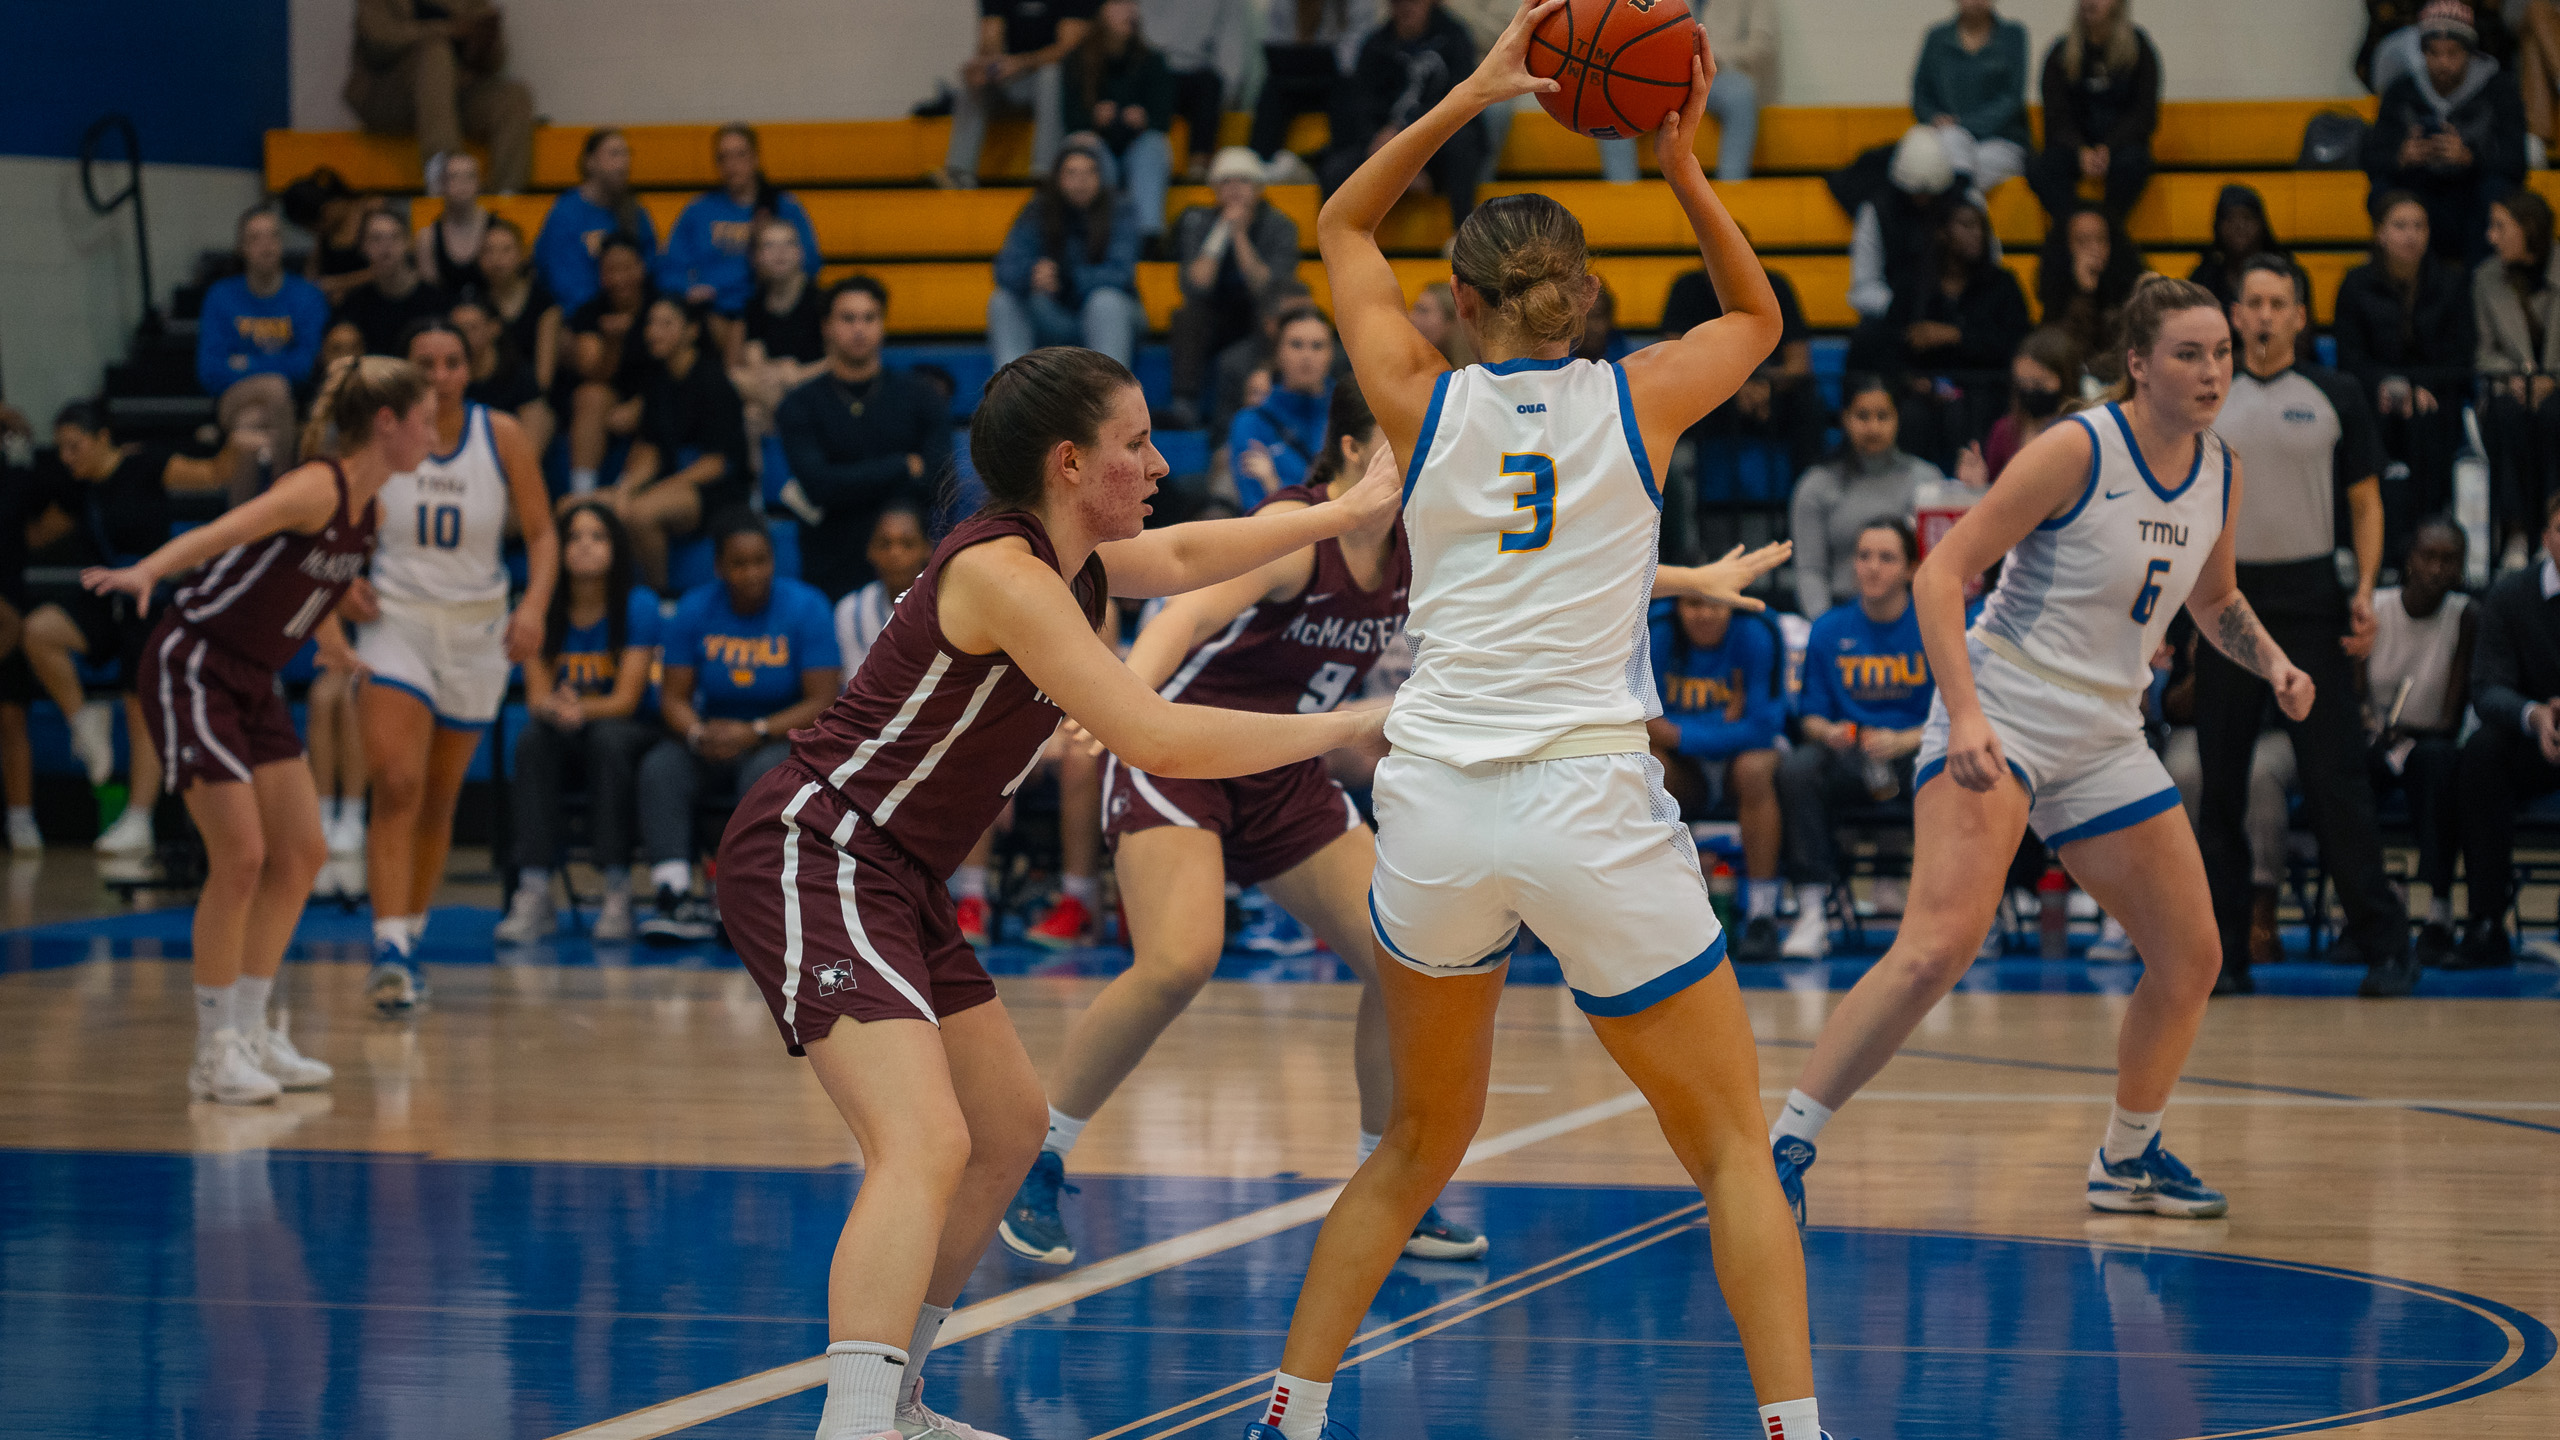 TMU women's basketball player Hailey Franco-DeRyck holds the balls above her head as she's guarded by a McMaster Marauders player